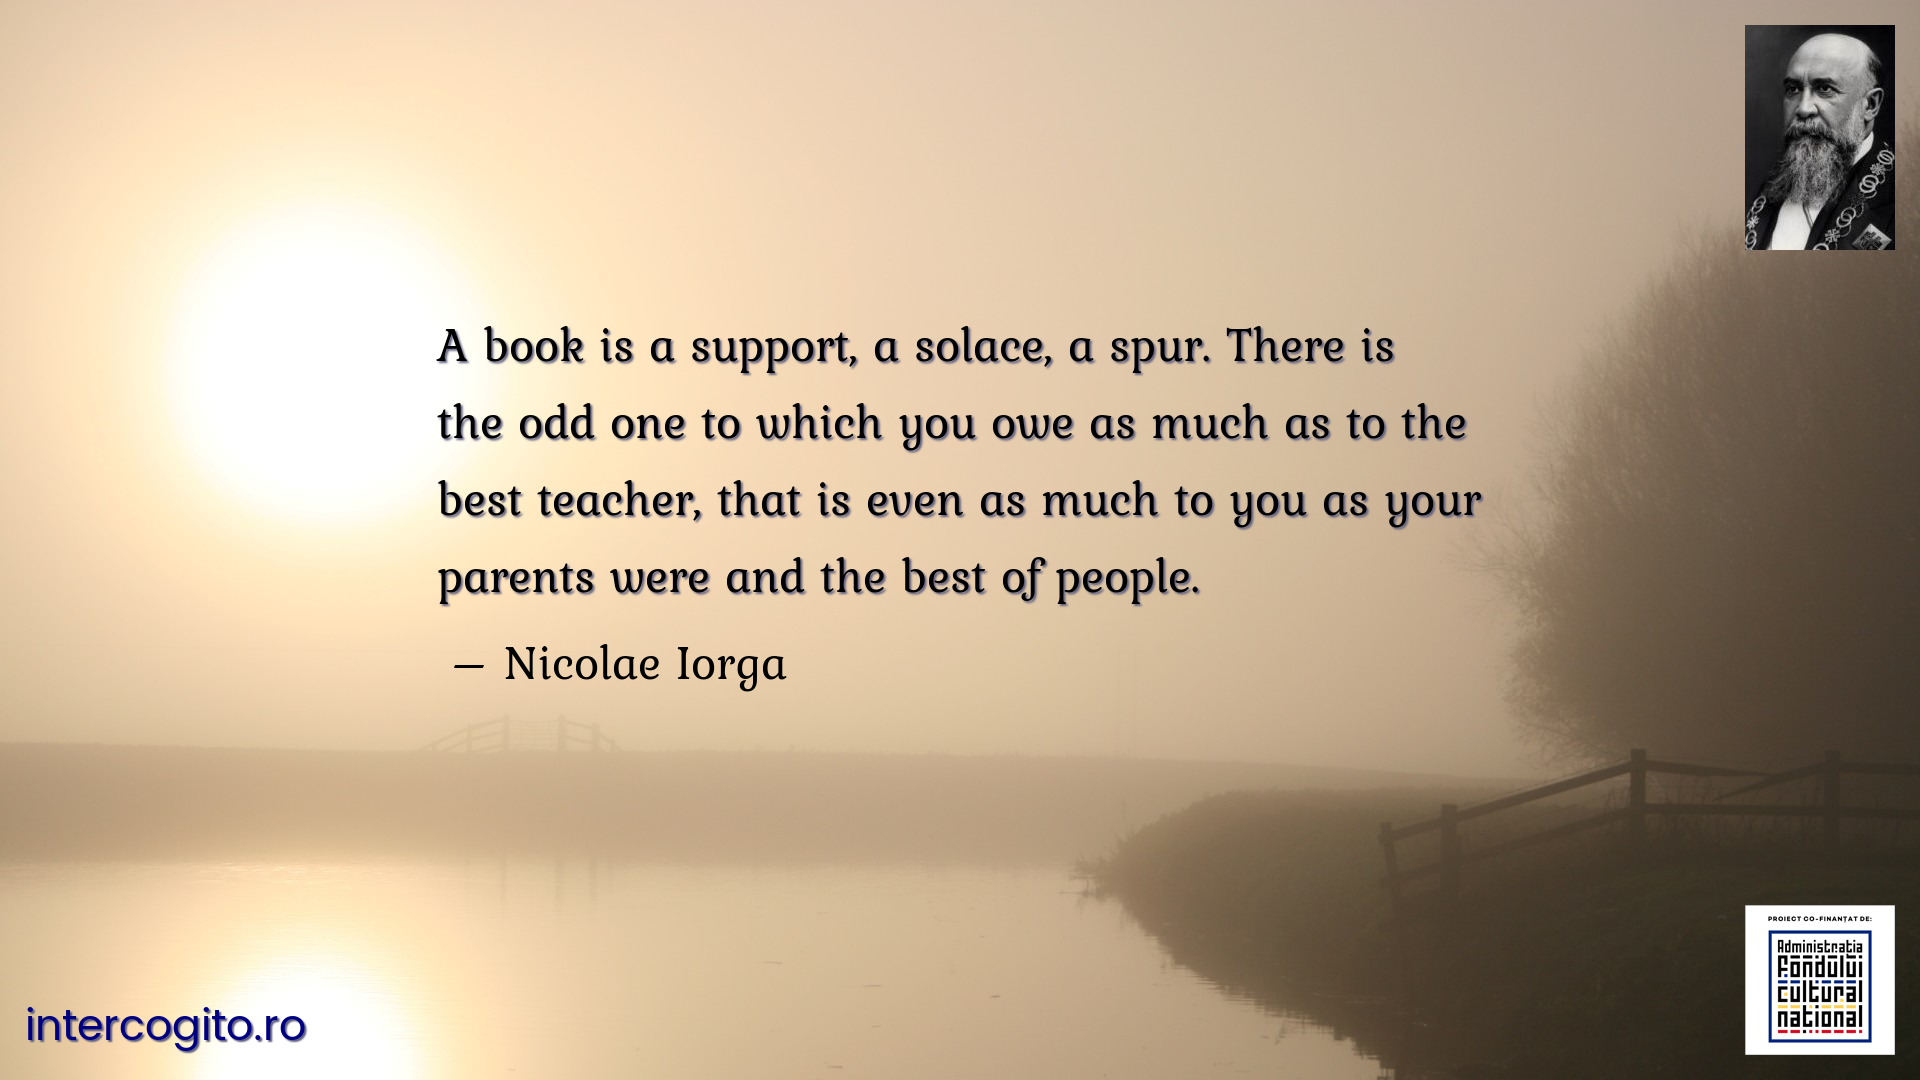 A book is a support, a solace, a spur. There is the odd one to which you owe as much as to the best teacher, that is even as much to you as your parents were and the best of people.